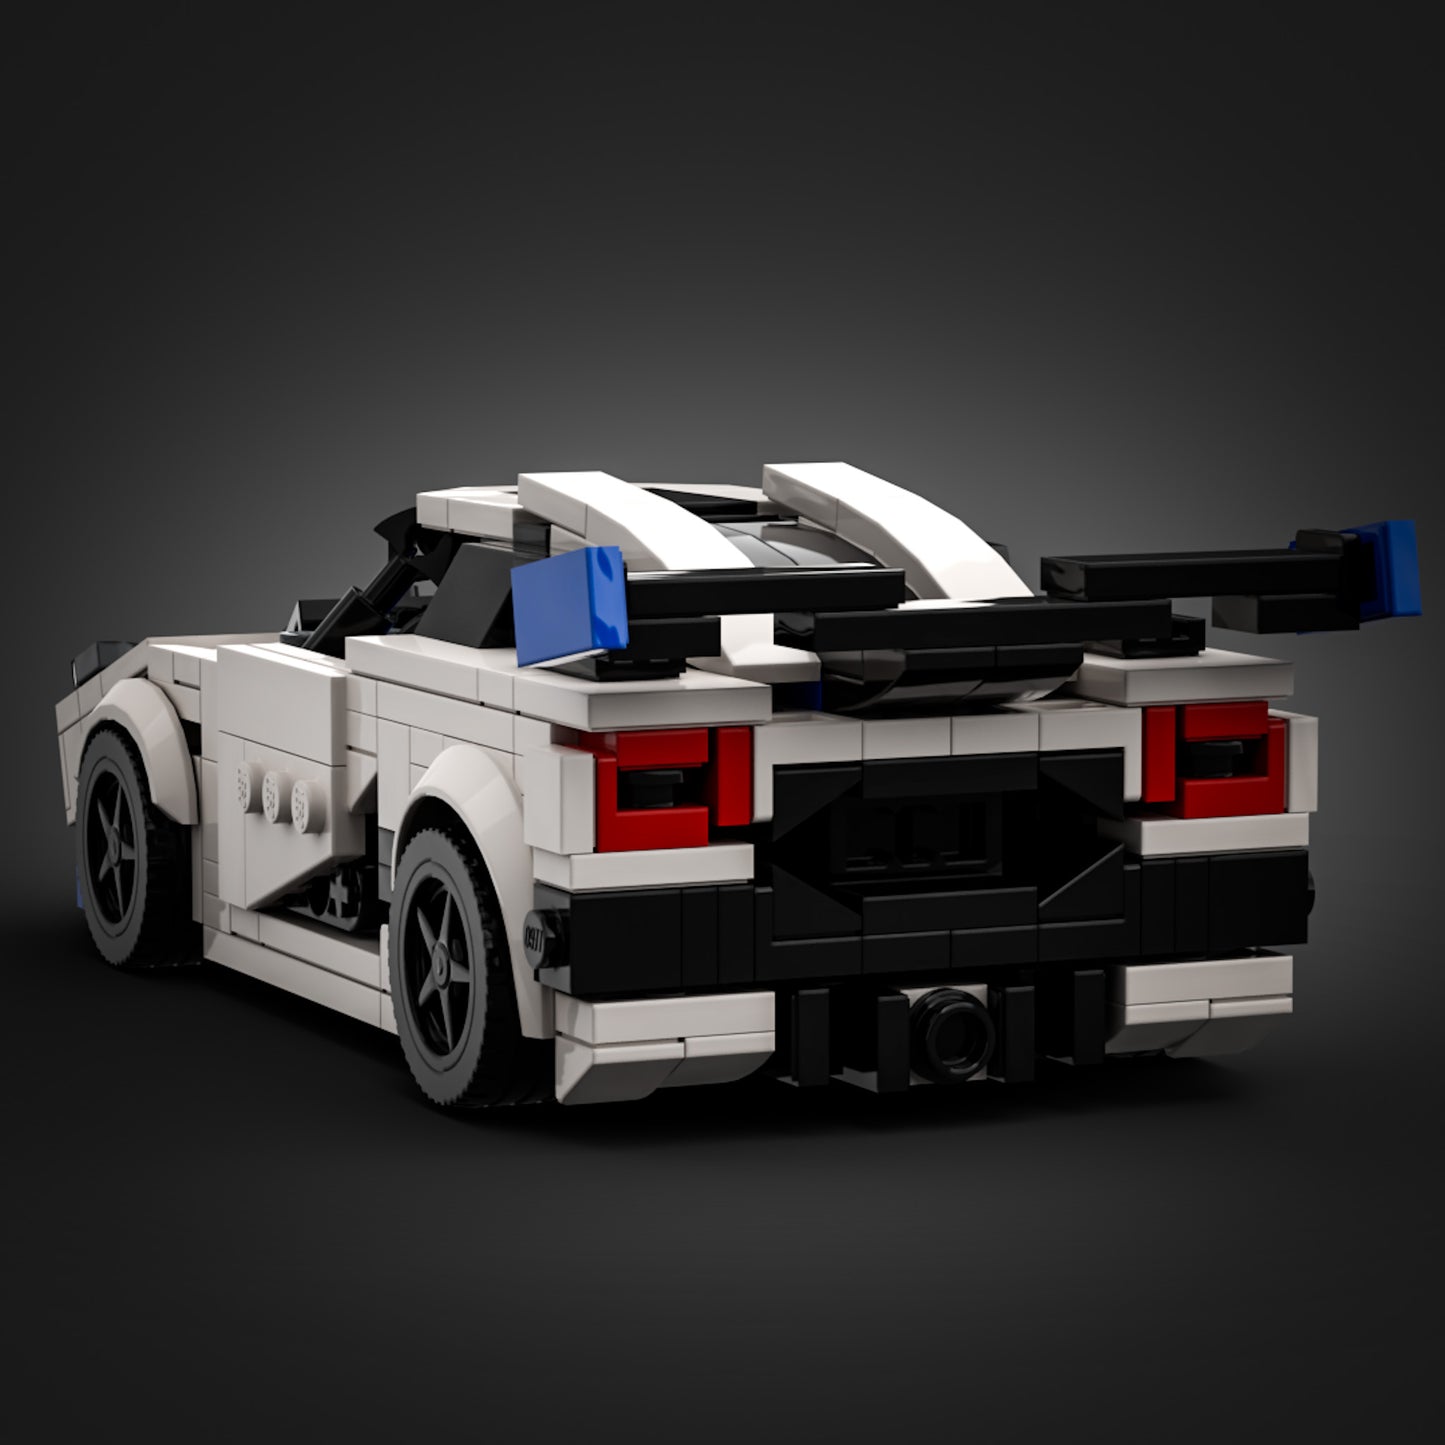 Inspired by Koenigsegg Agera RS (instructions)